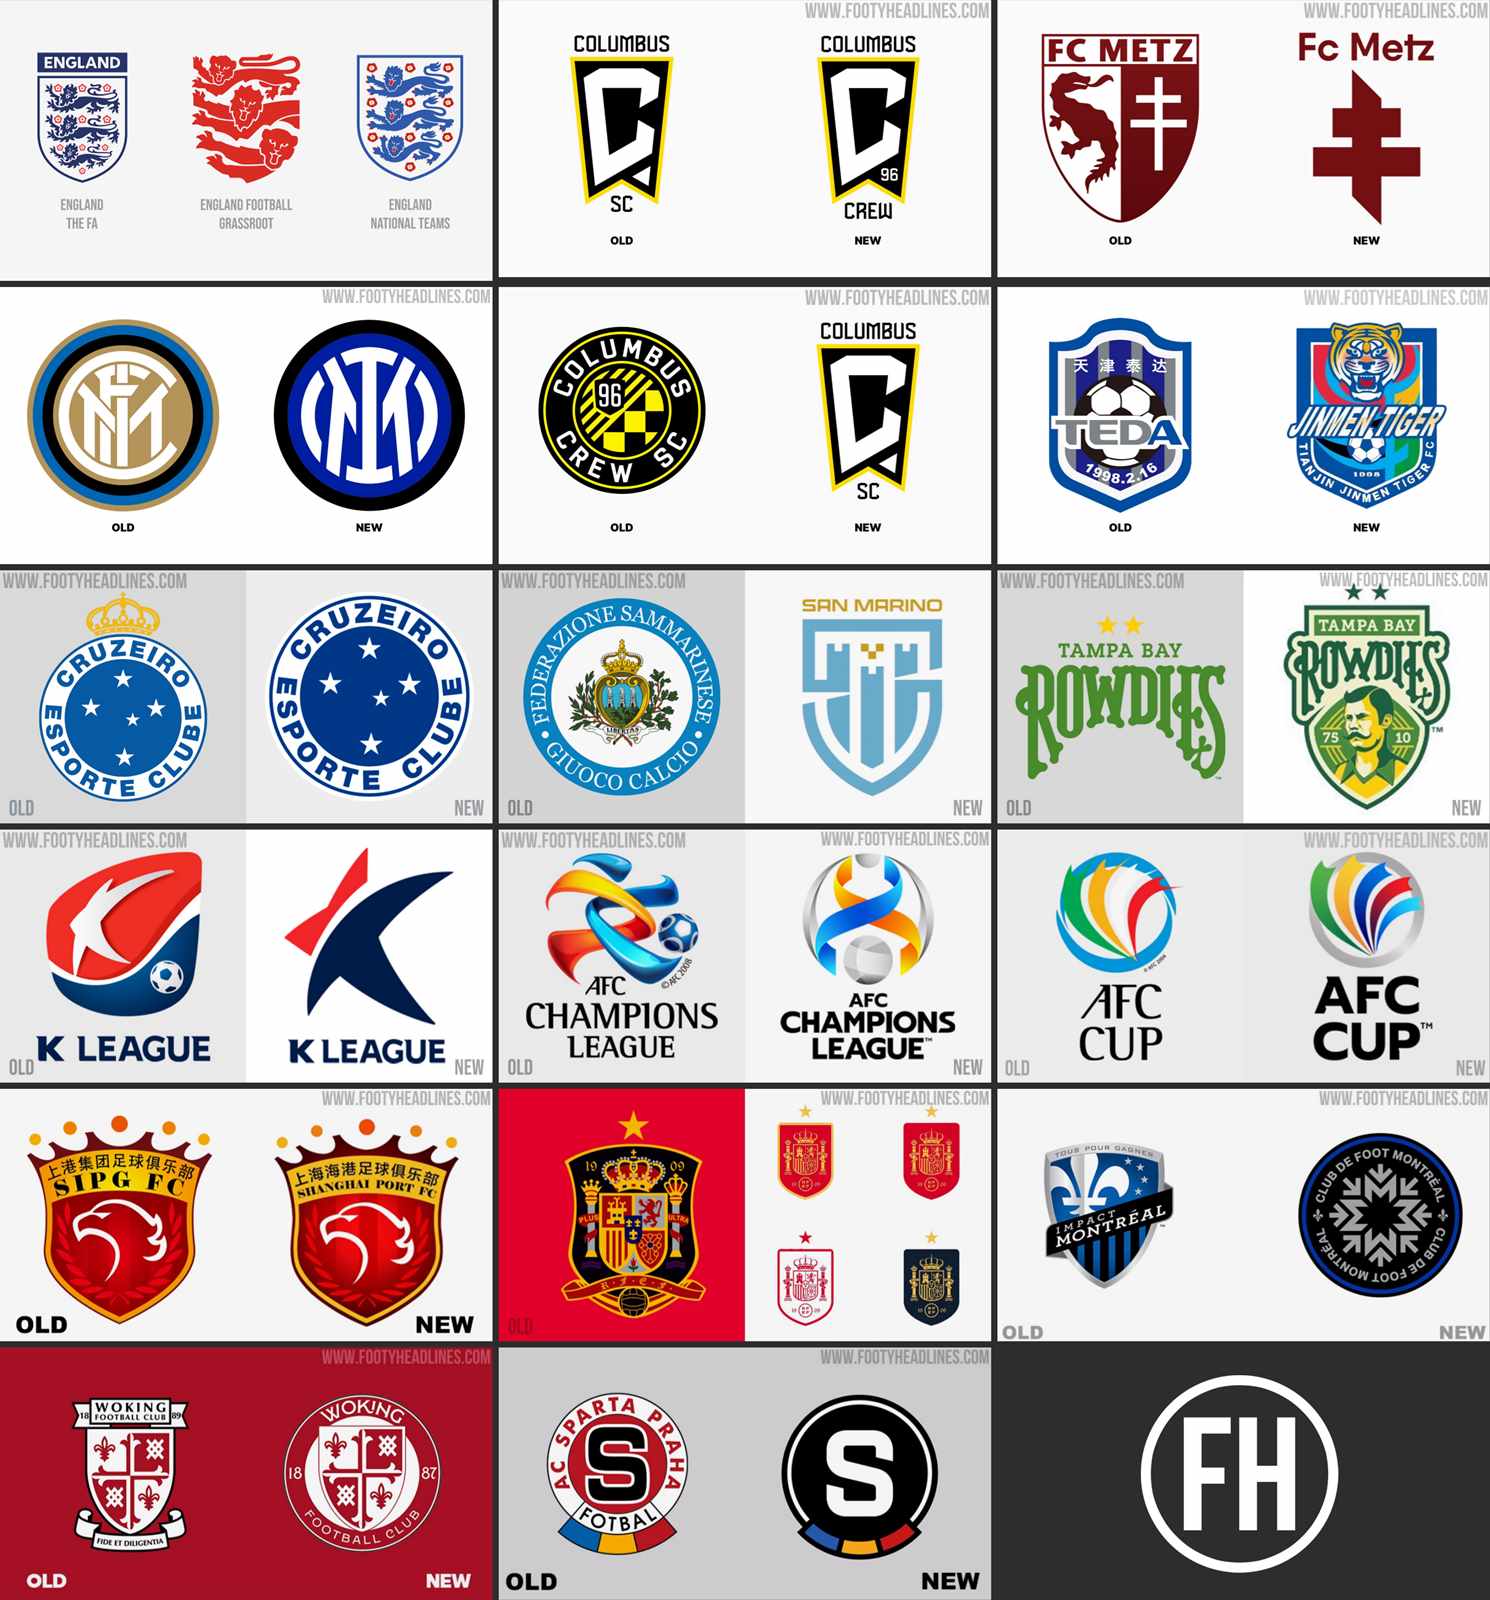 New 2021 Football Logos (Clubs, National Teams, and Competitions) r/soccer